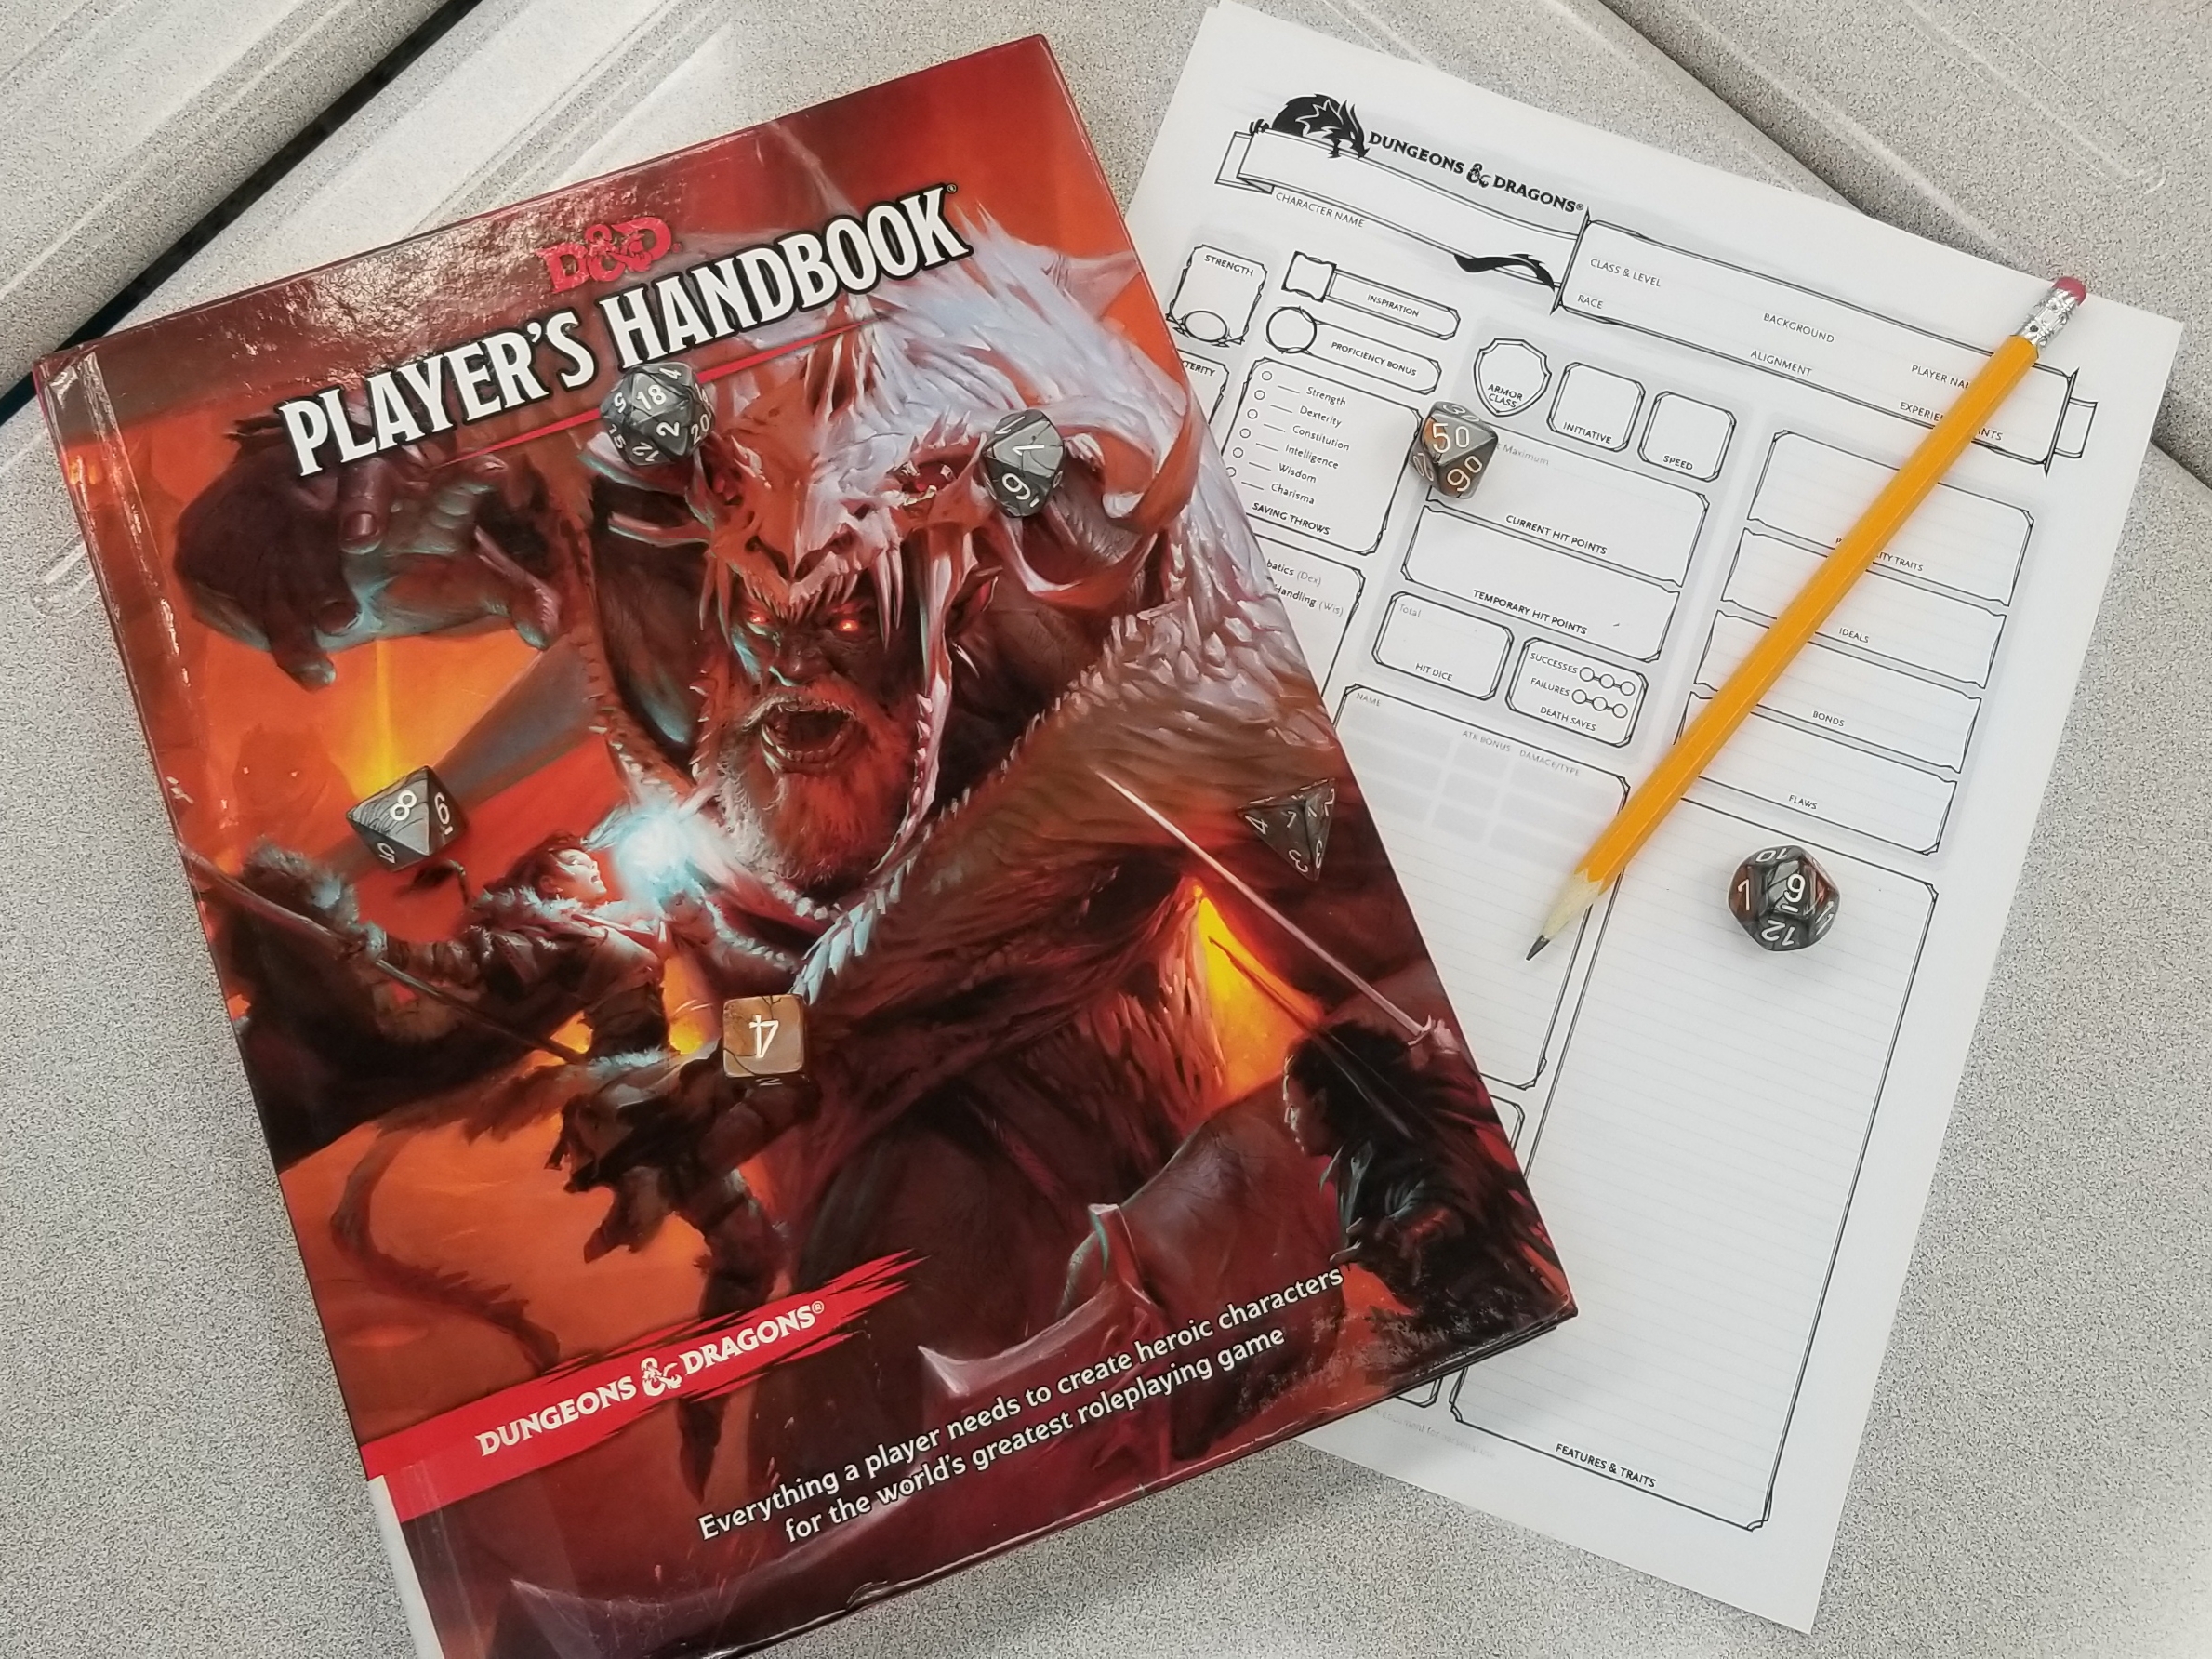 A Player's Handbook, character sheet, pencil and dice for Dungeons & Dragons